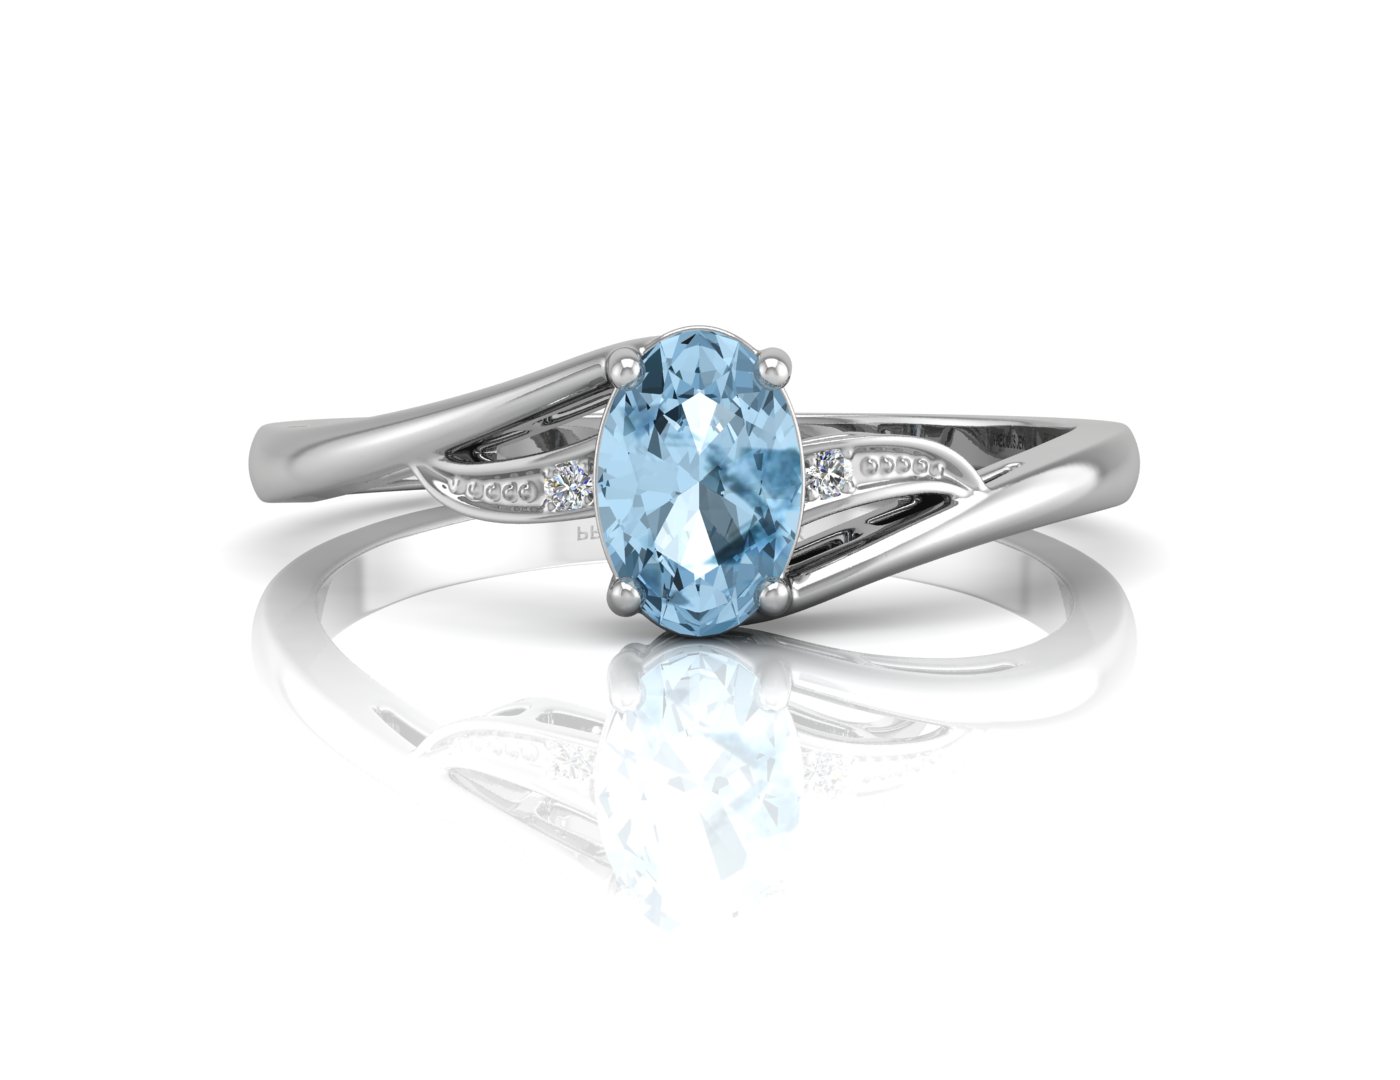 9ct White Gold Fancy Cluster Diamond Blue Topaz Ring (BT0.58) 0.10 Carats - Image 4 of 5